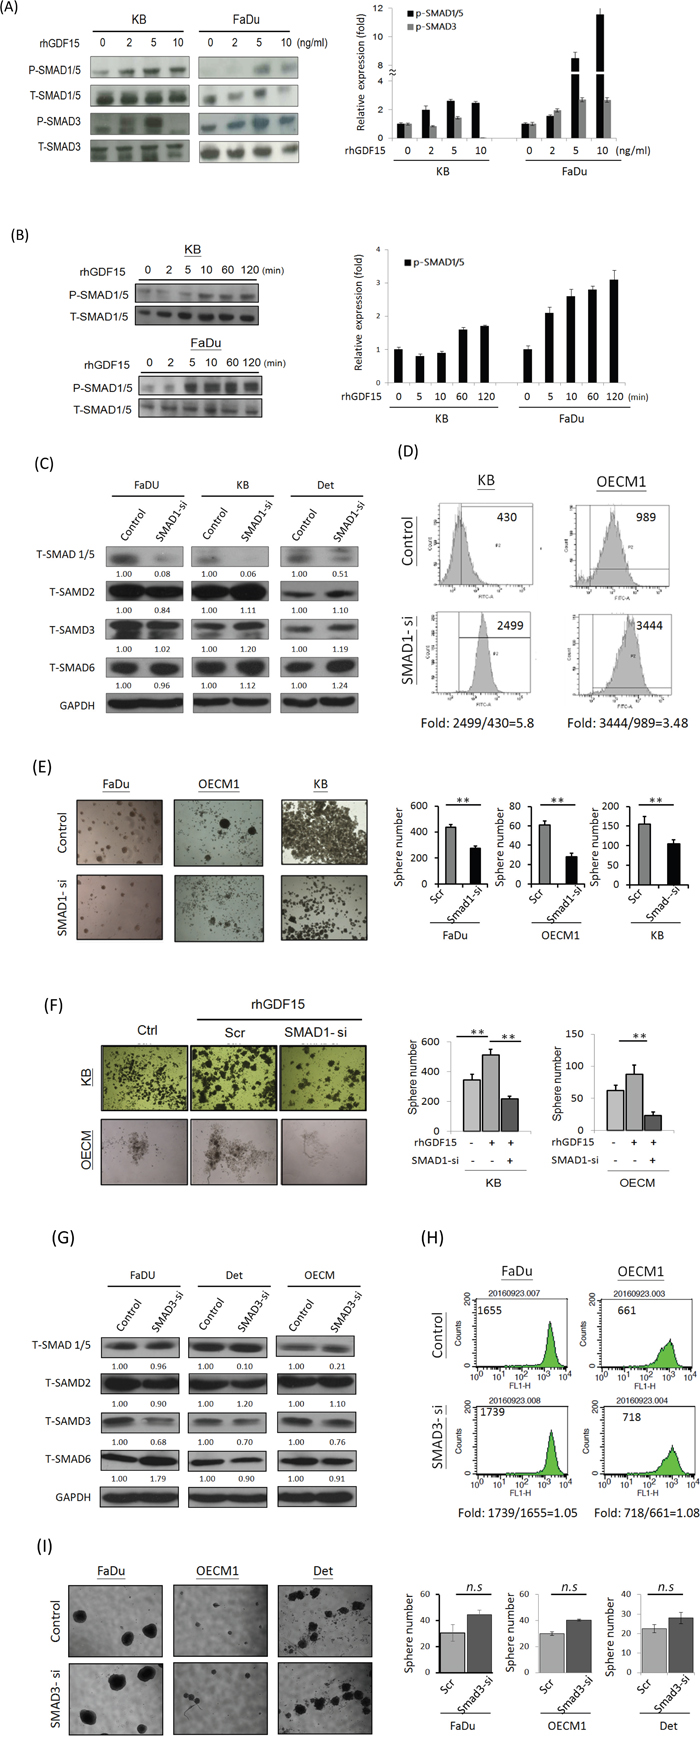 GDF15 regulates cellular functions via a SMAD-associated signaling pathway.